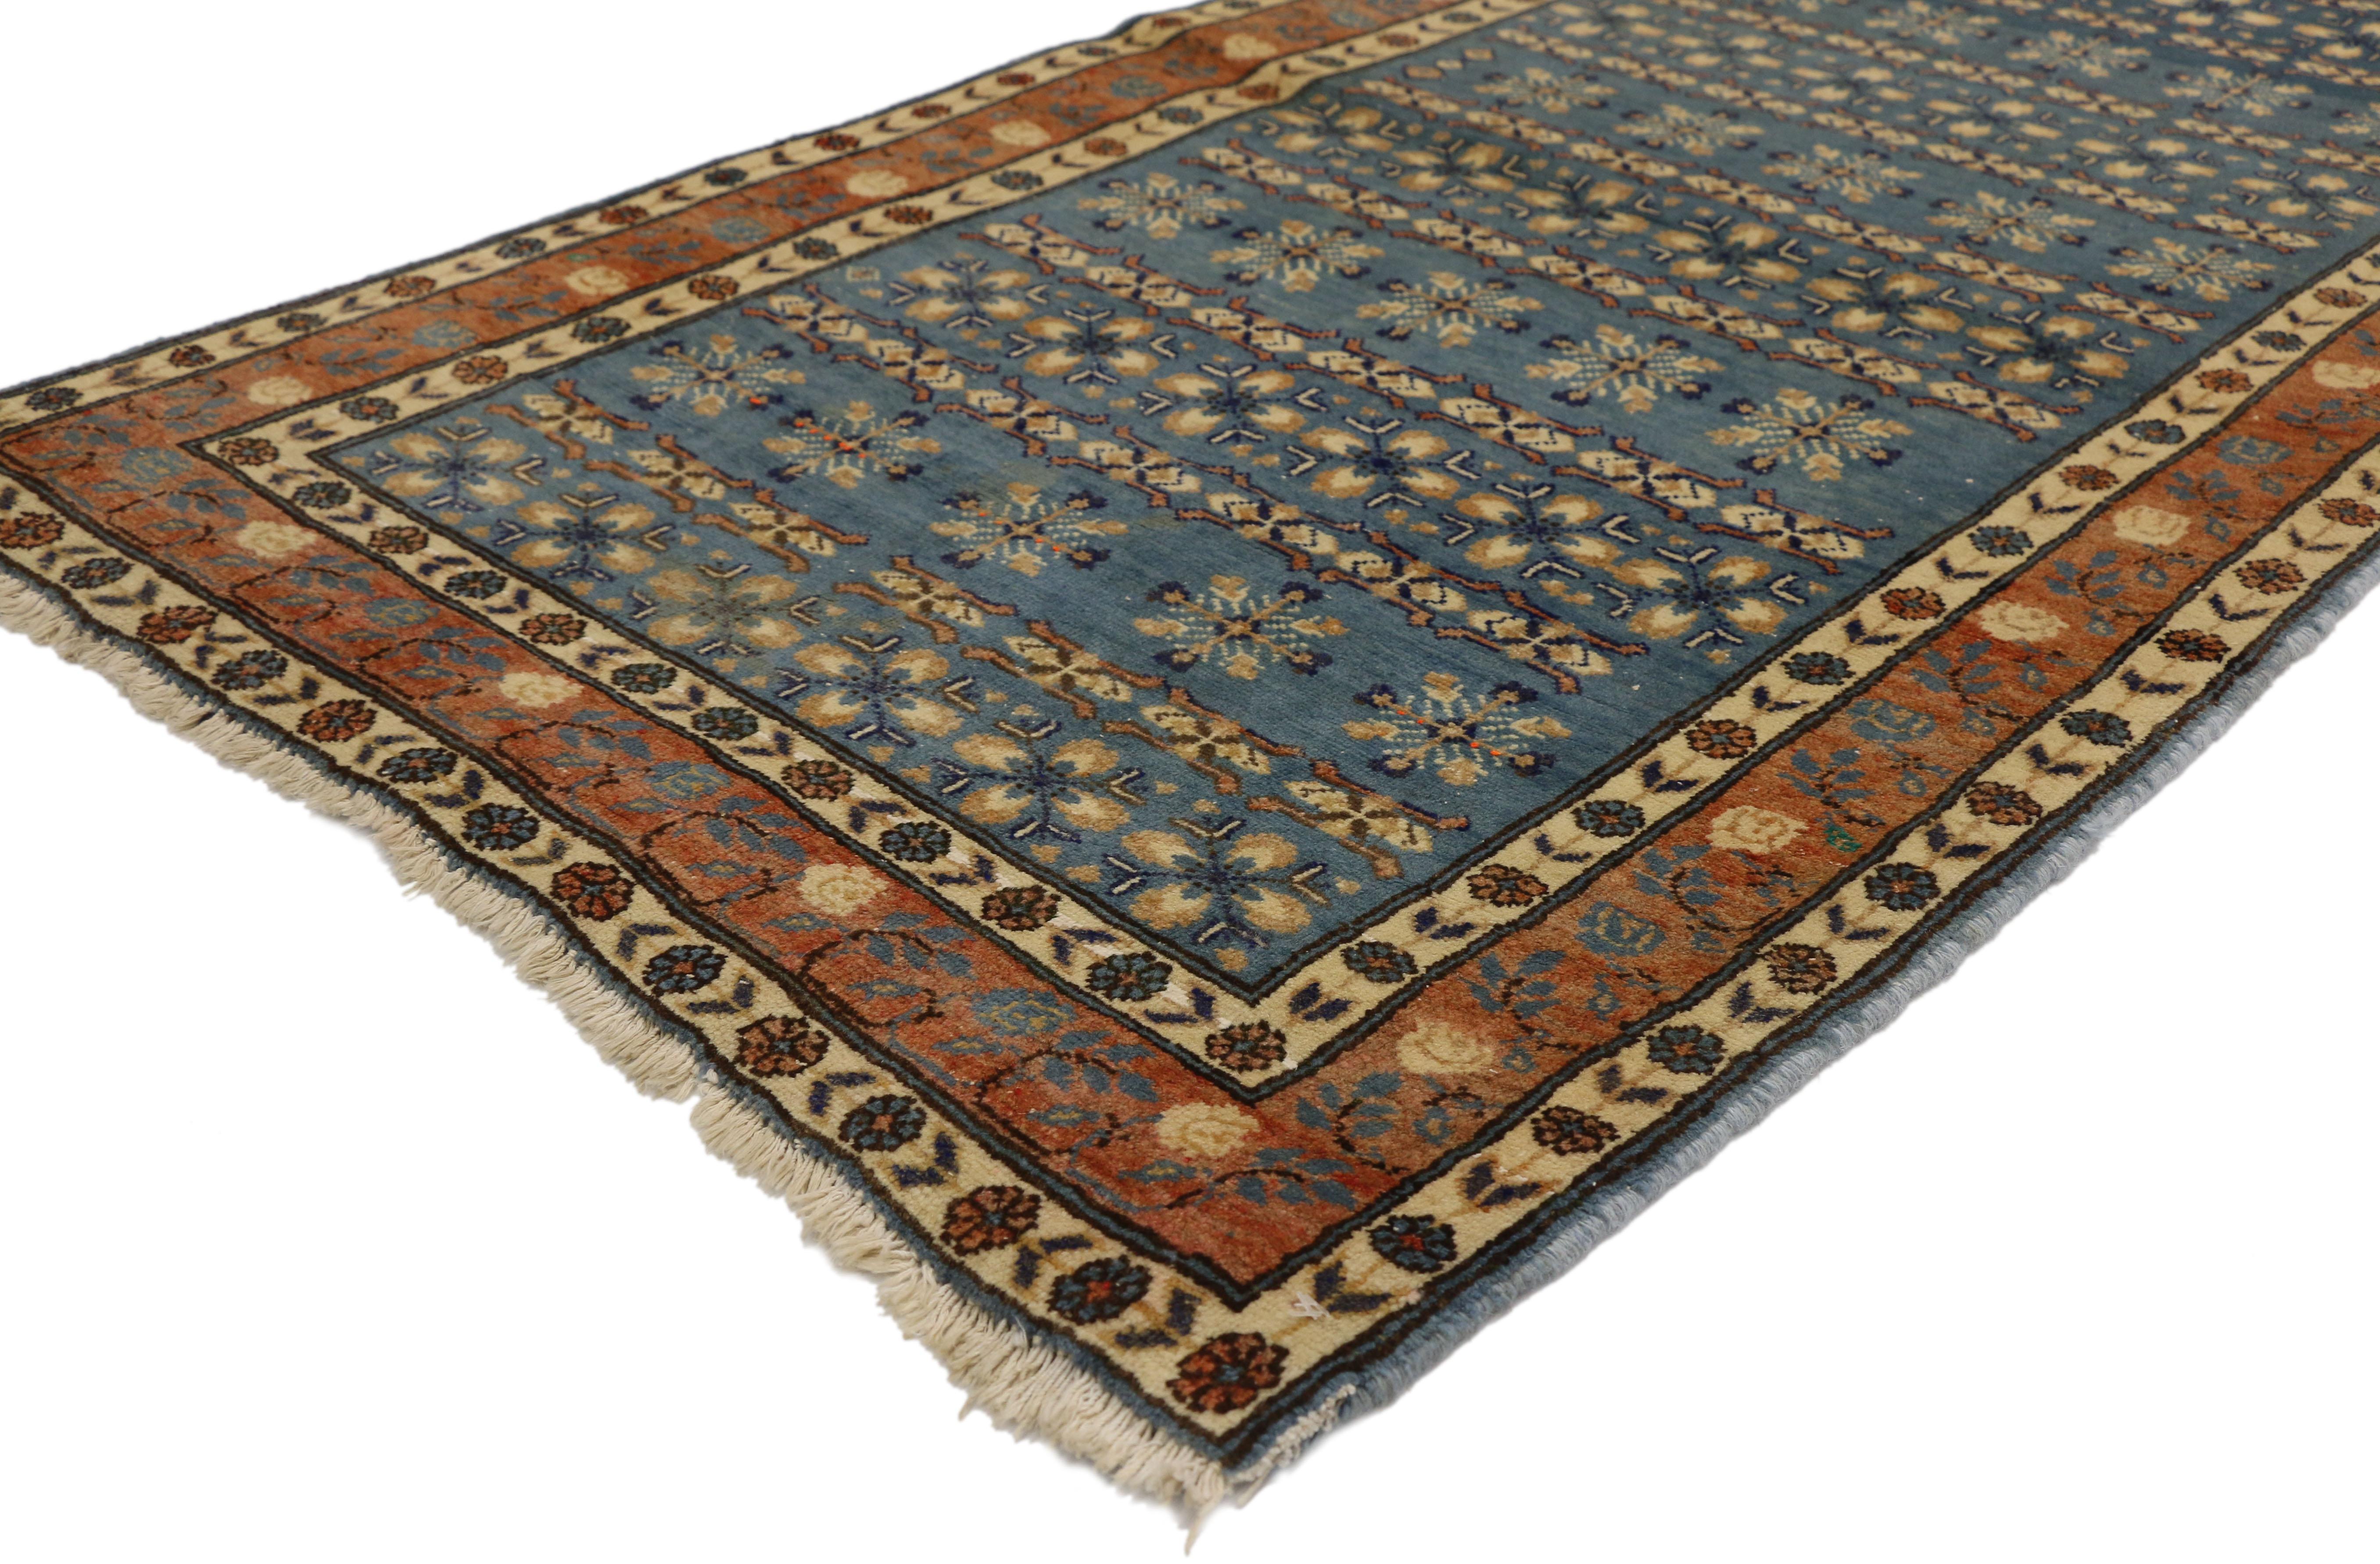 75177, vintage Persian Mashhad rug accent rug. With its ornate detailing and well-balanced symmetry, this hand knotted wool vintage Persian Mashhad rug highlights both Renaissance and Jacobean style. Alternating horizontal rows of stylized florals